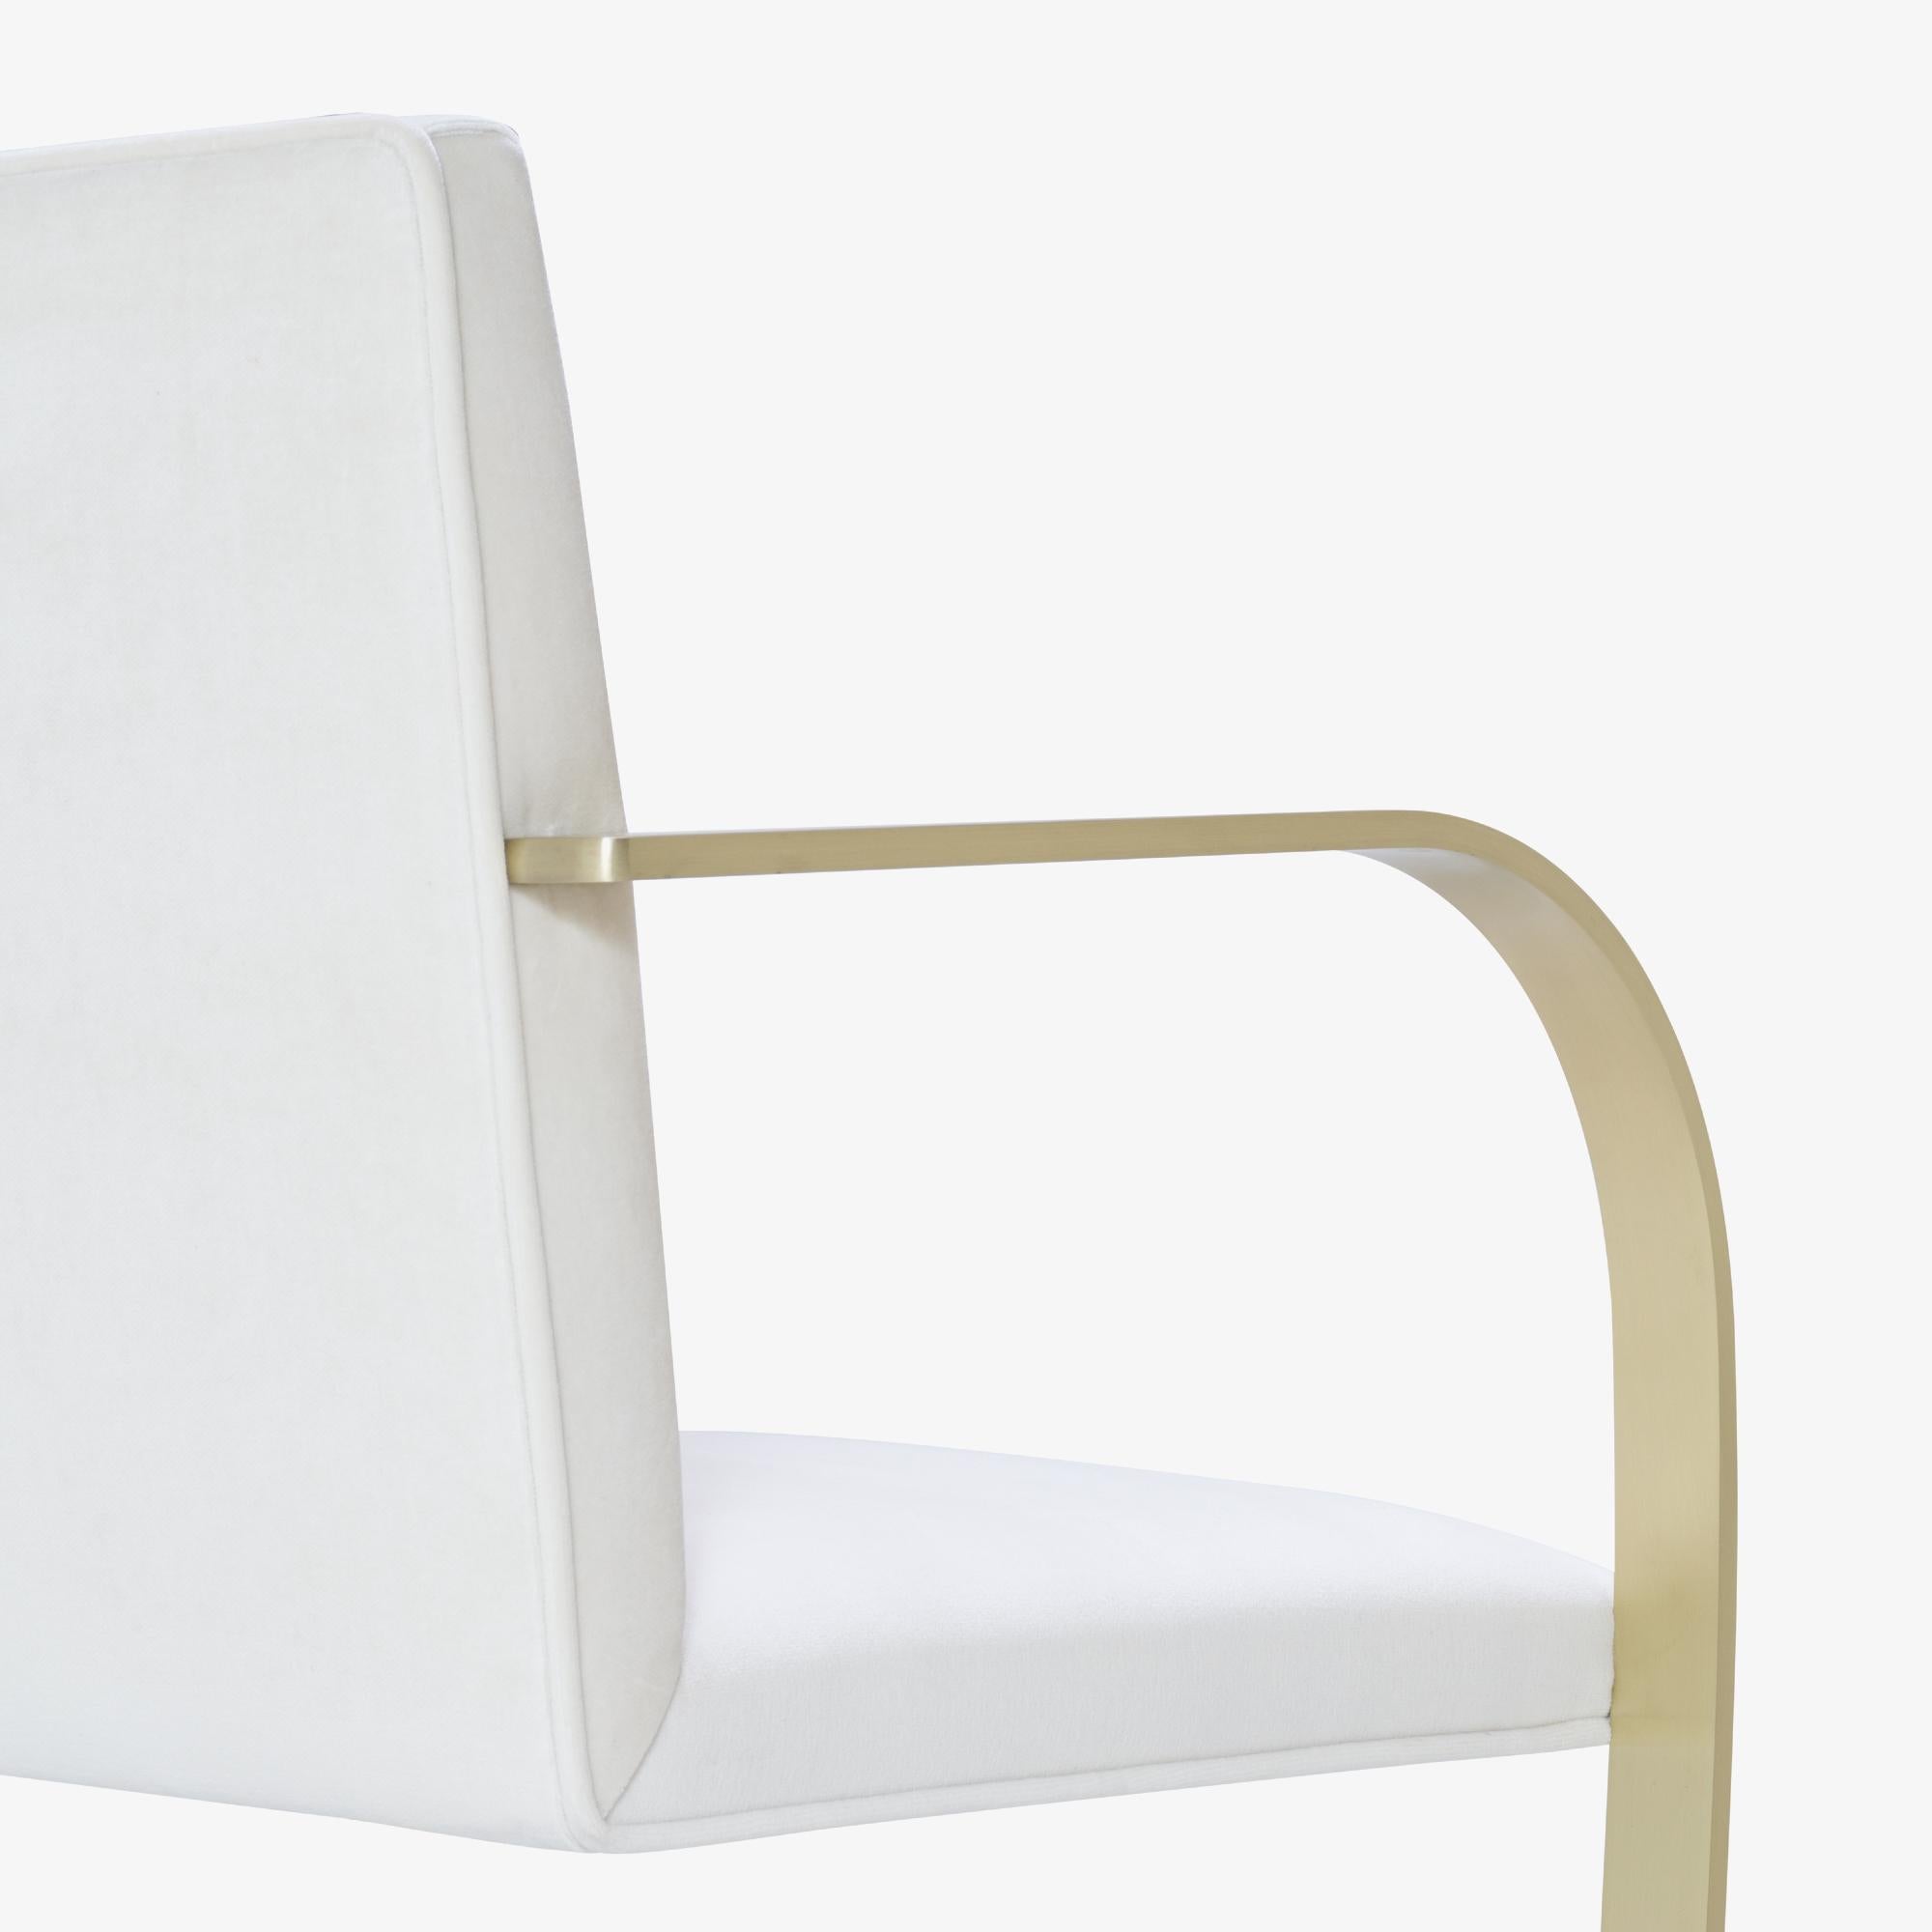 American Brno Flat-Bar Chairs in Velvet, Brushed Brass by Mies van der Rohe for Knoll For Sale